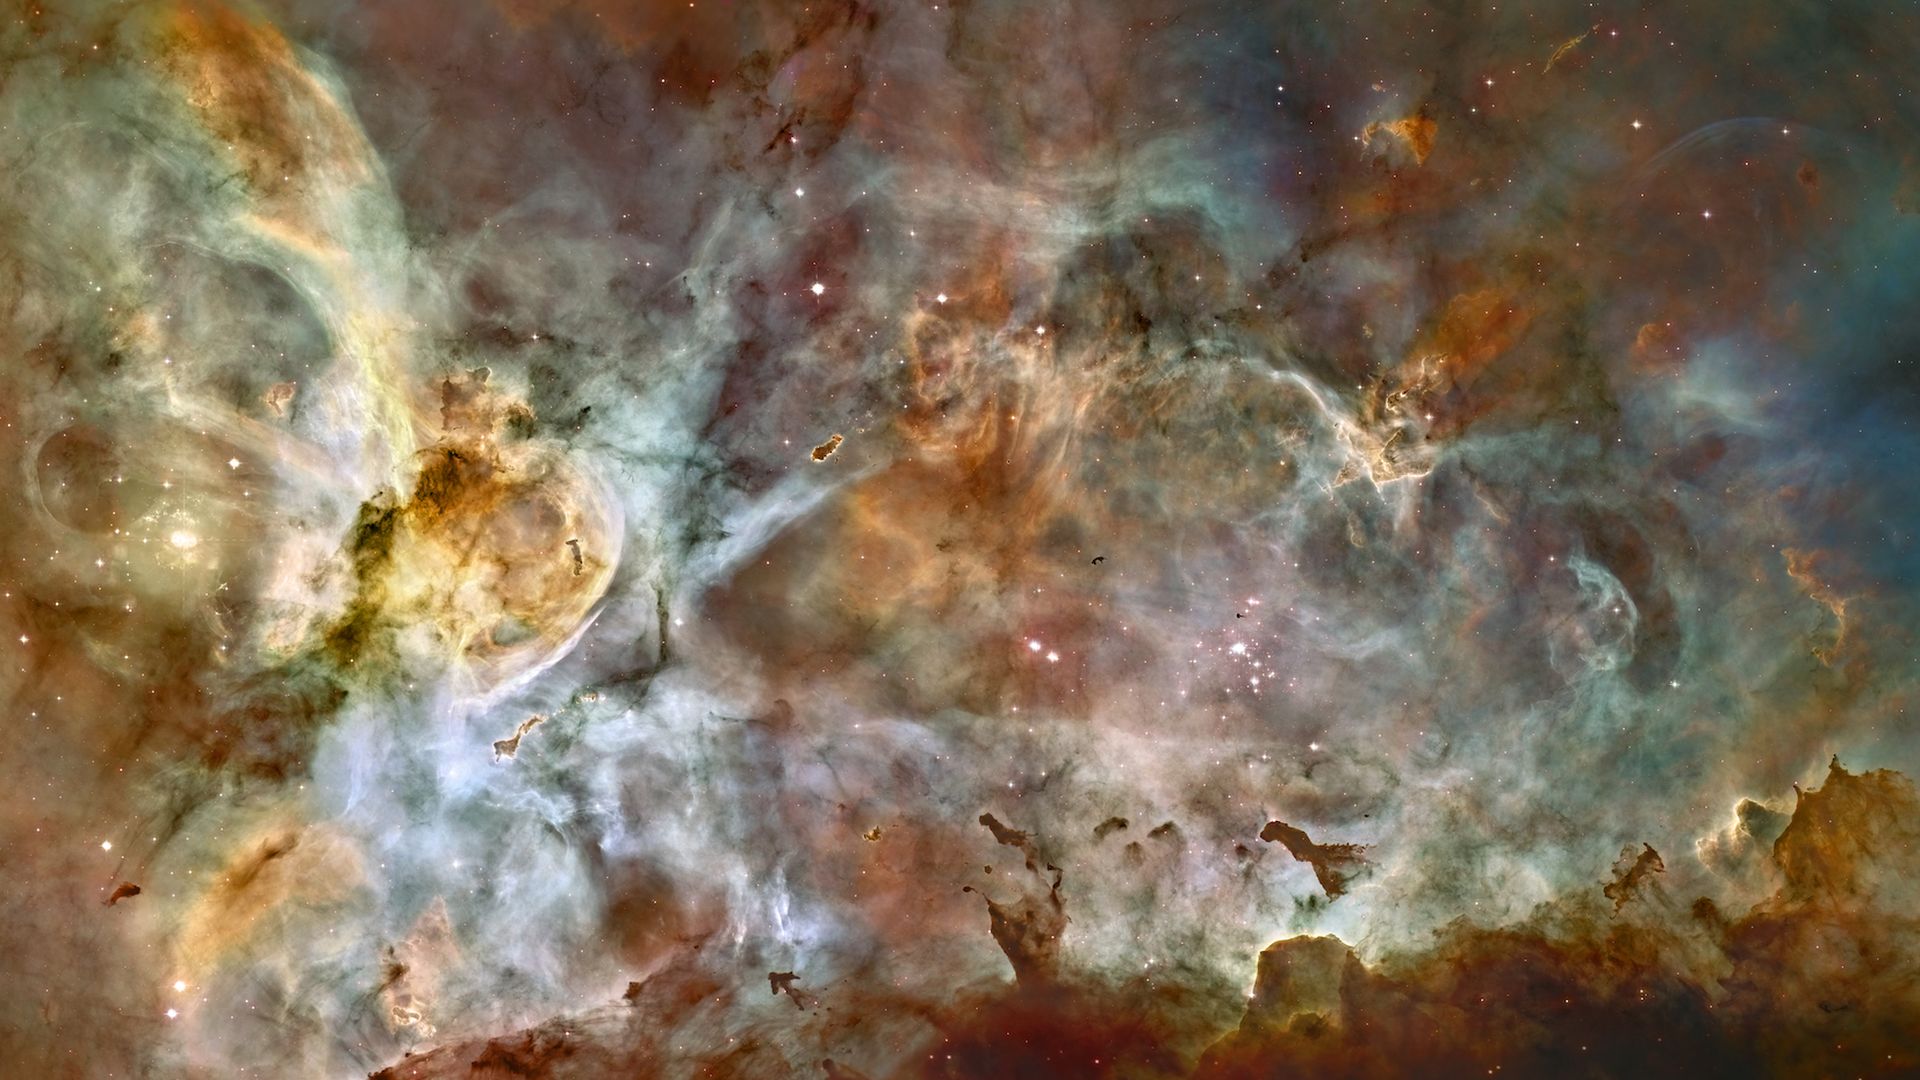 The clouds of gas and colorful dust seen by the Hubble Space Telescope in the Carina nebula.